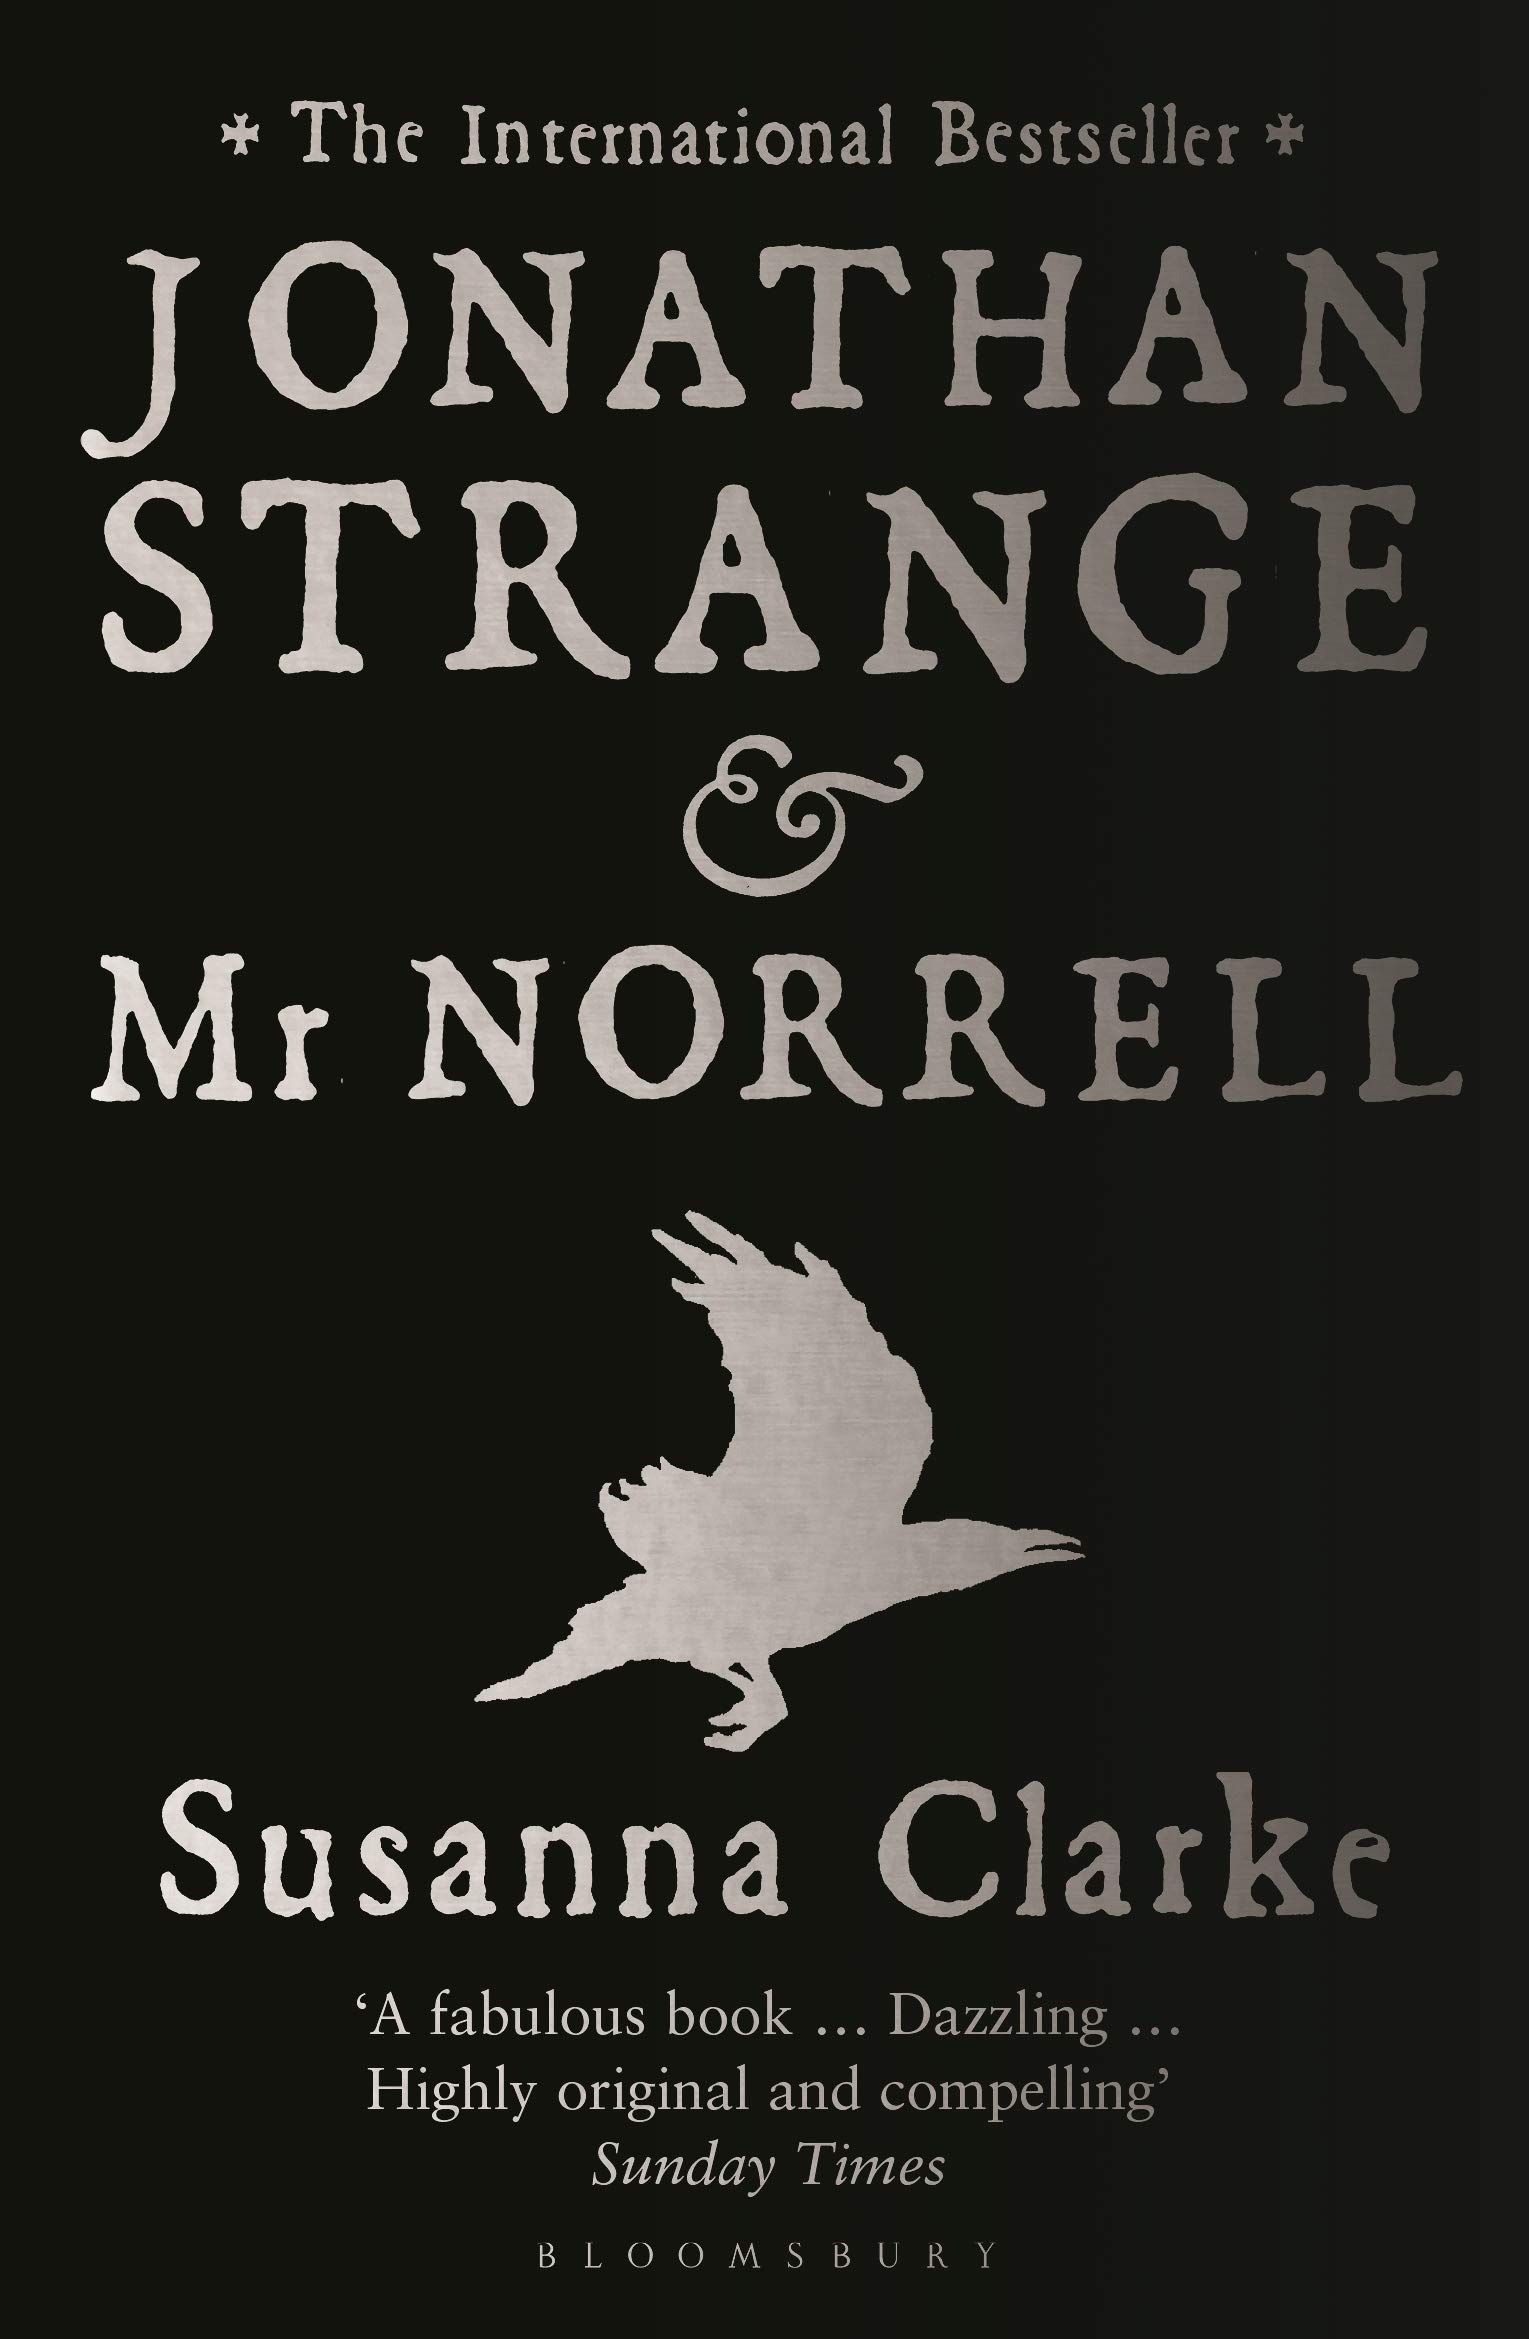 A graphic of the cover of Jonathan Strange and Mr. Norrell by Susanna Clarke